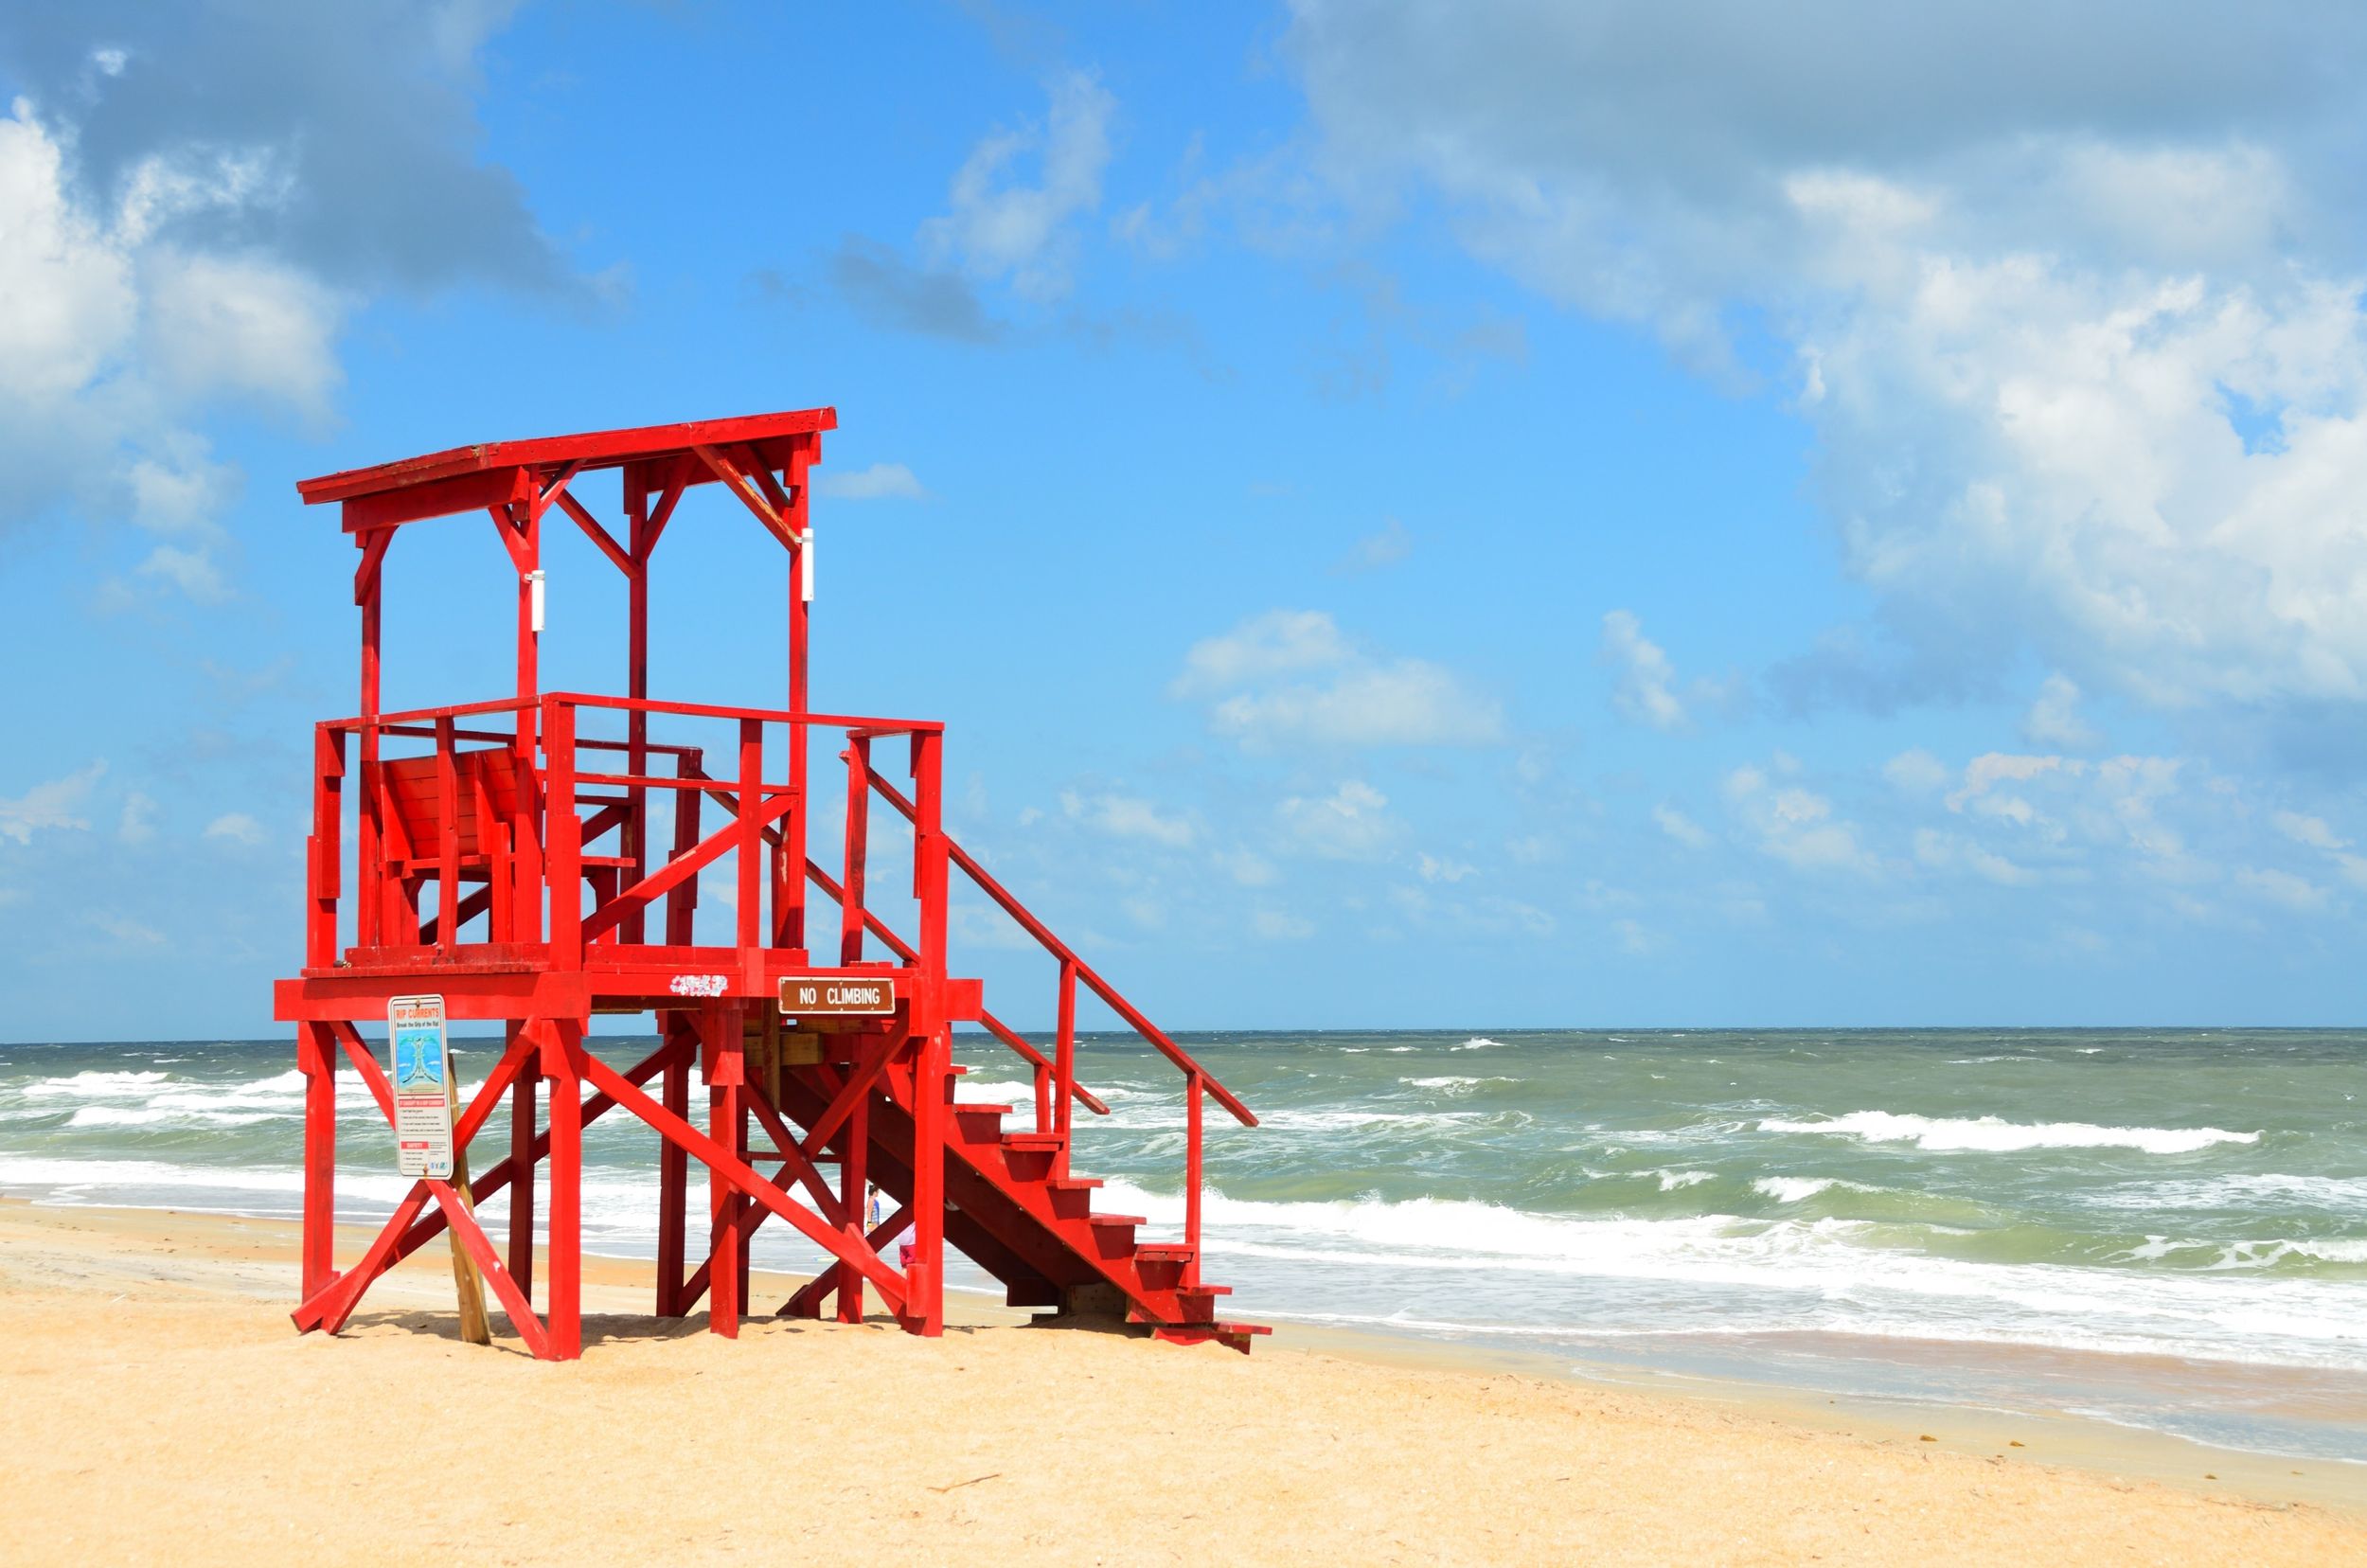 Red lifeguard tower on the beach.